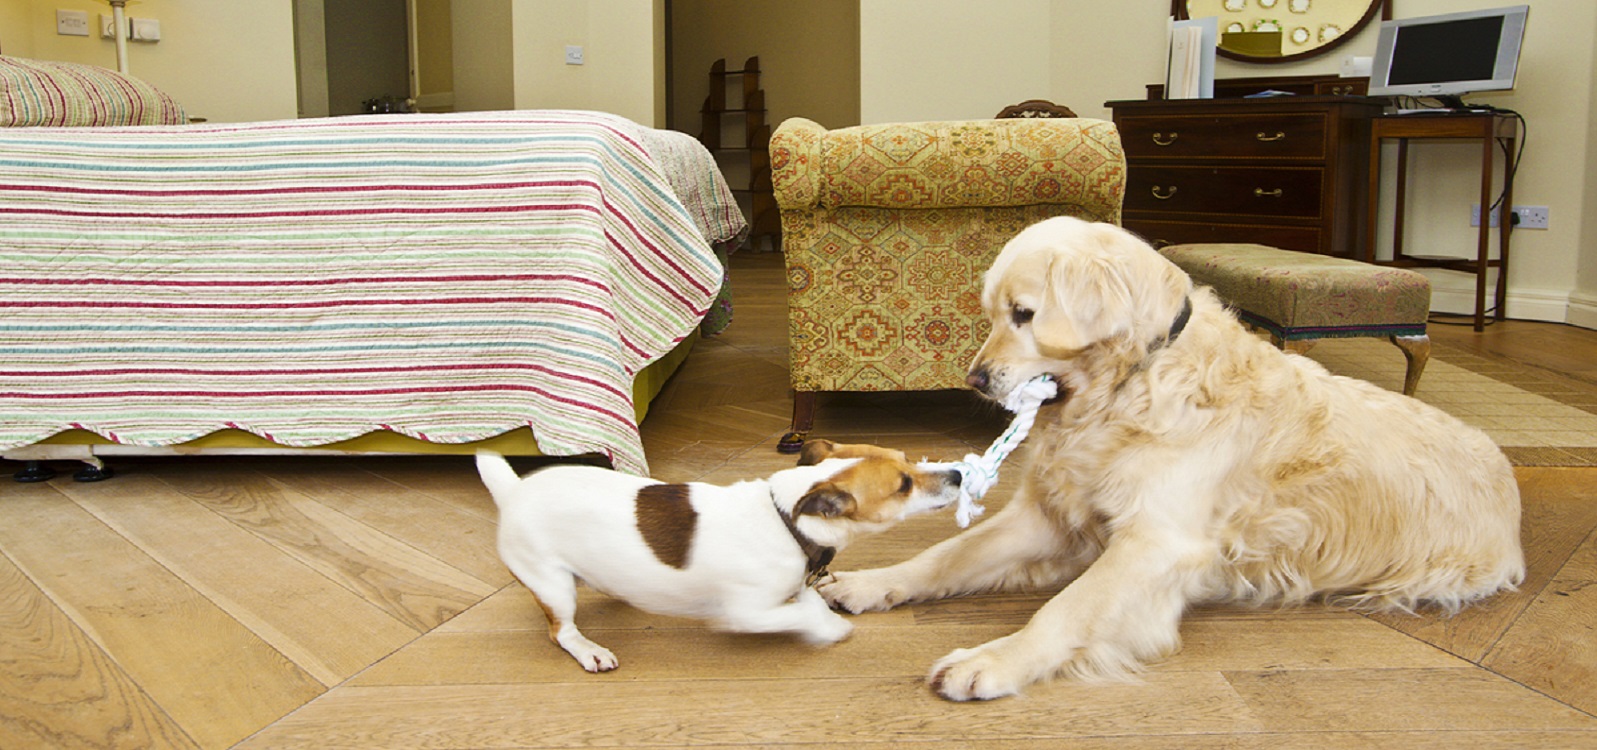 The petting room. Dog friendly Hotel. Pets at Home. Pet friendly Hotel. Pets friendly фото.